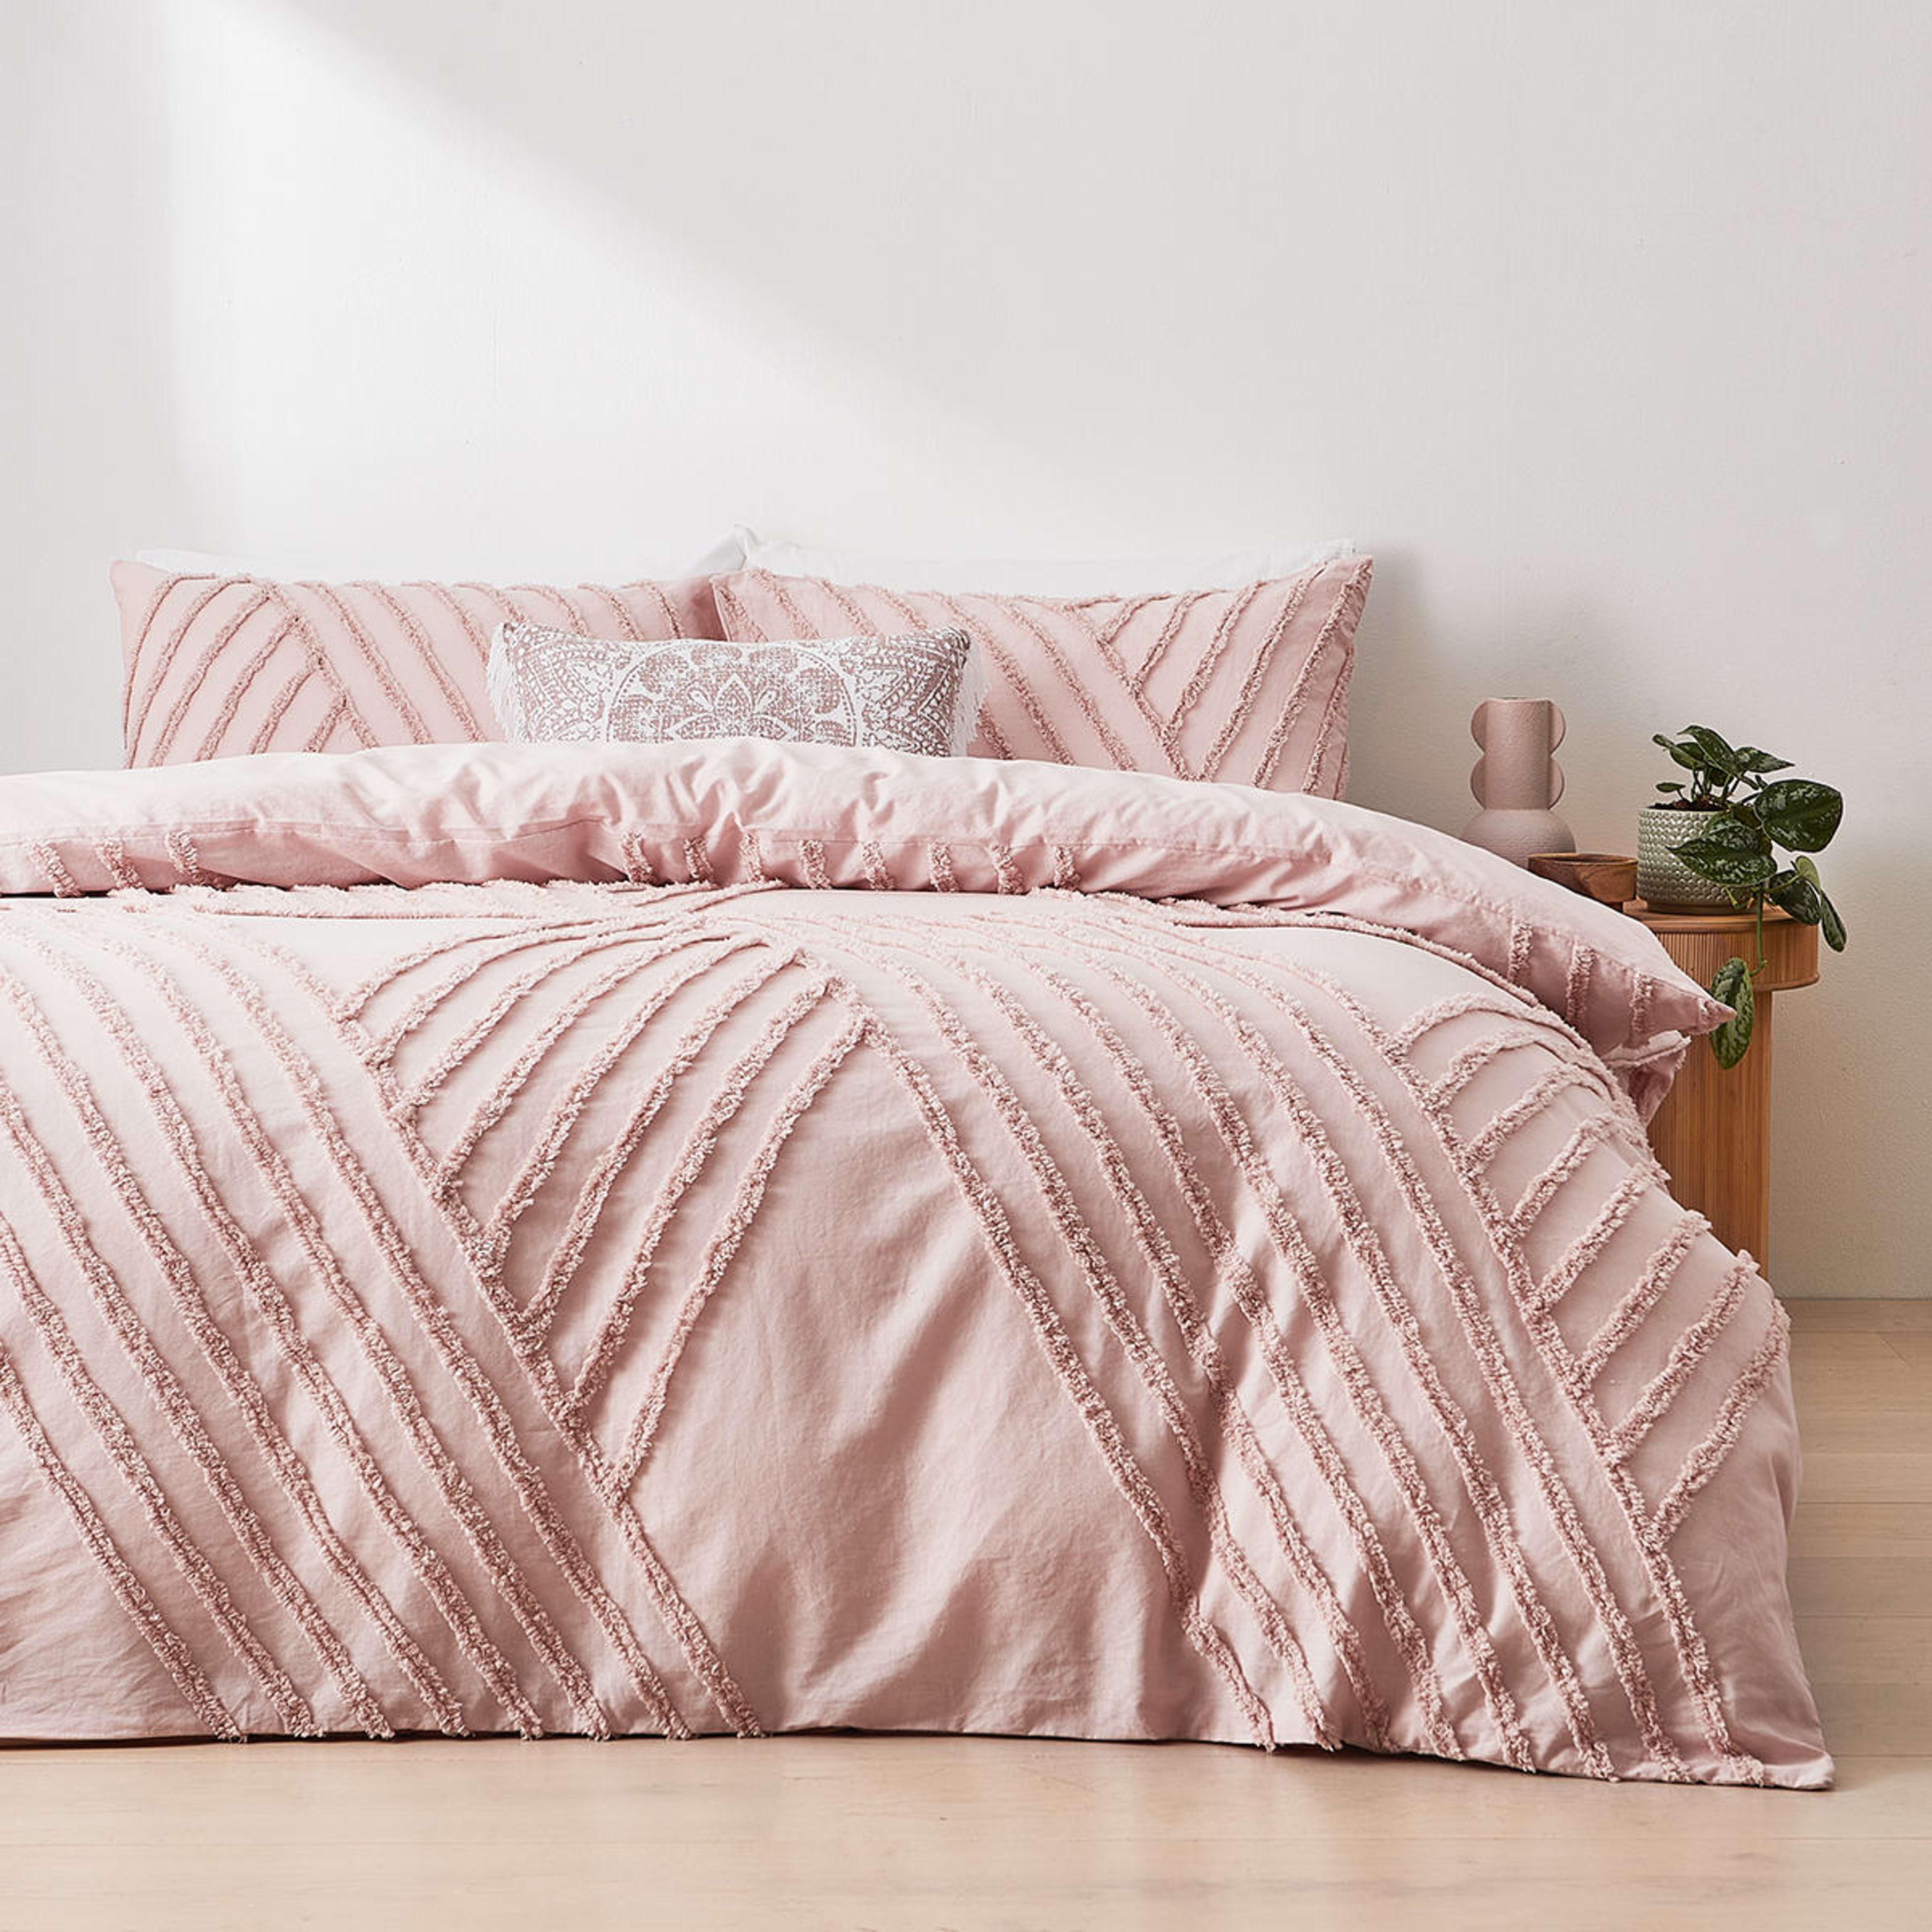 Tarni Cotton Quilt Cover Set - Queen Bed, Pink